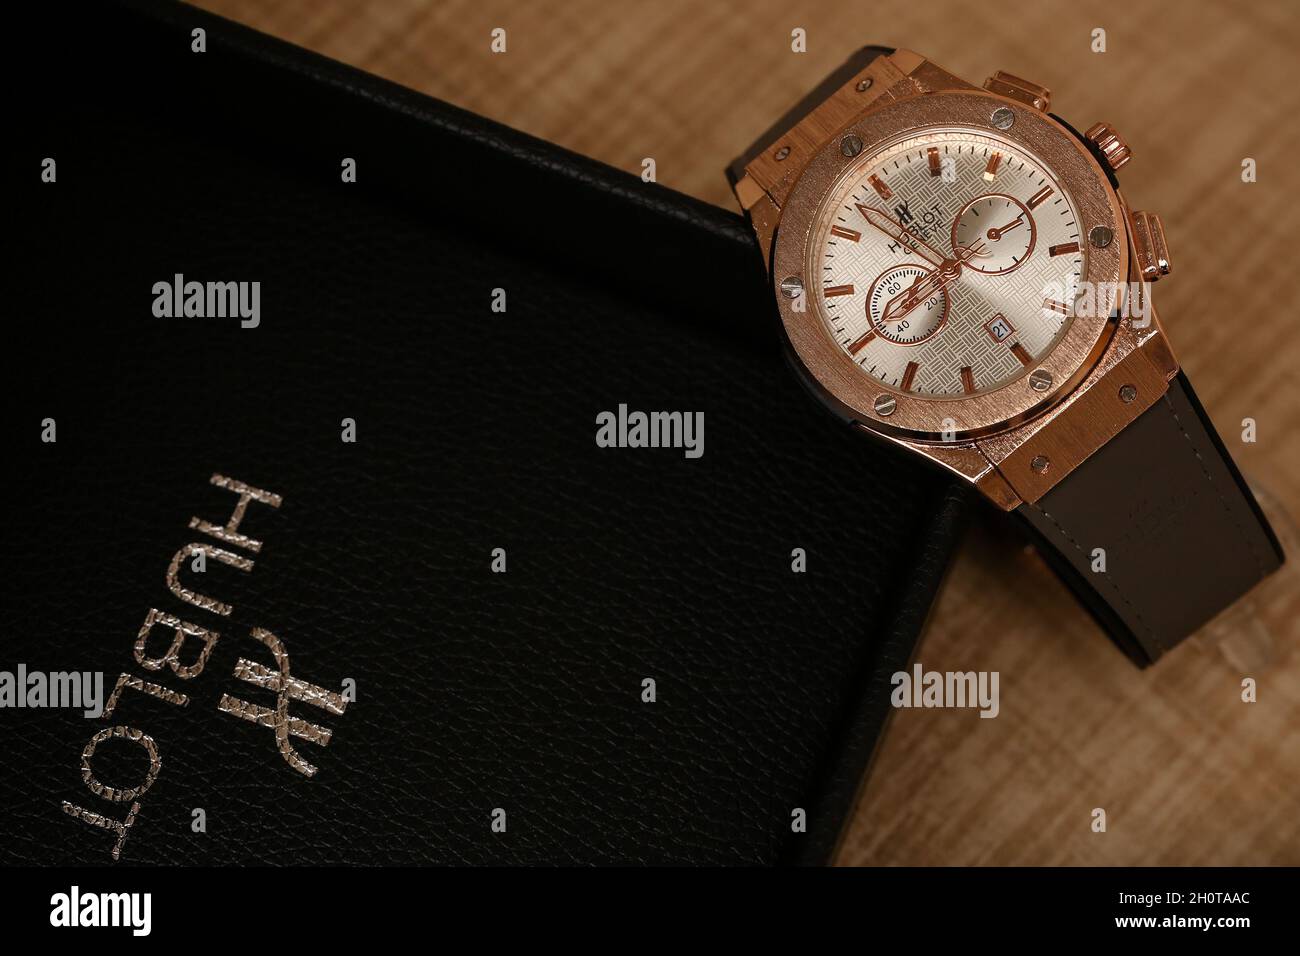 Watch Images Products Stock Photo